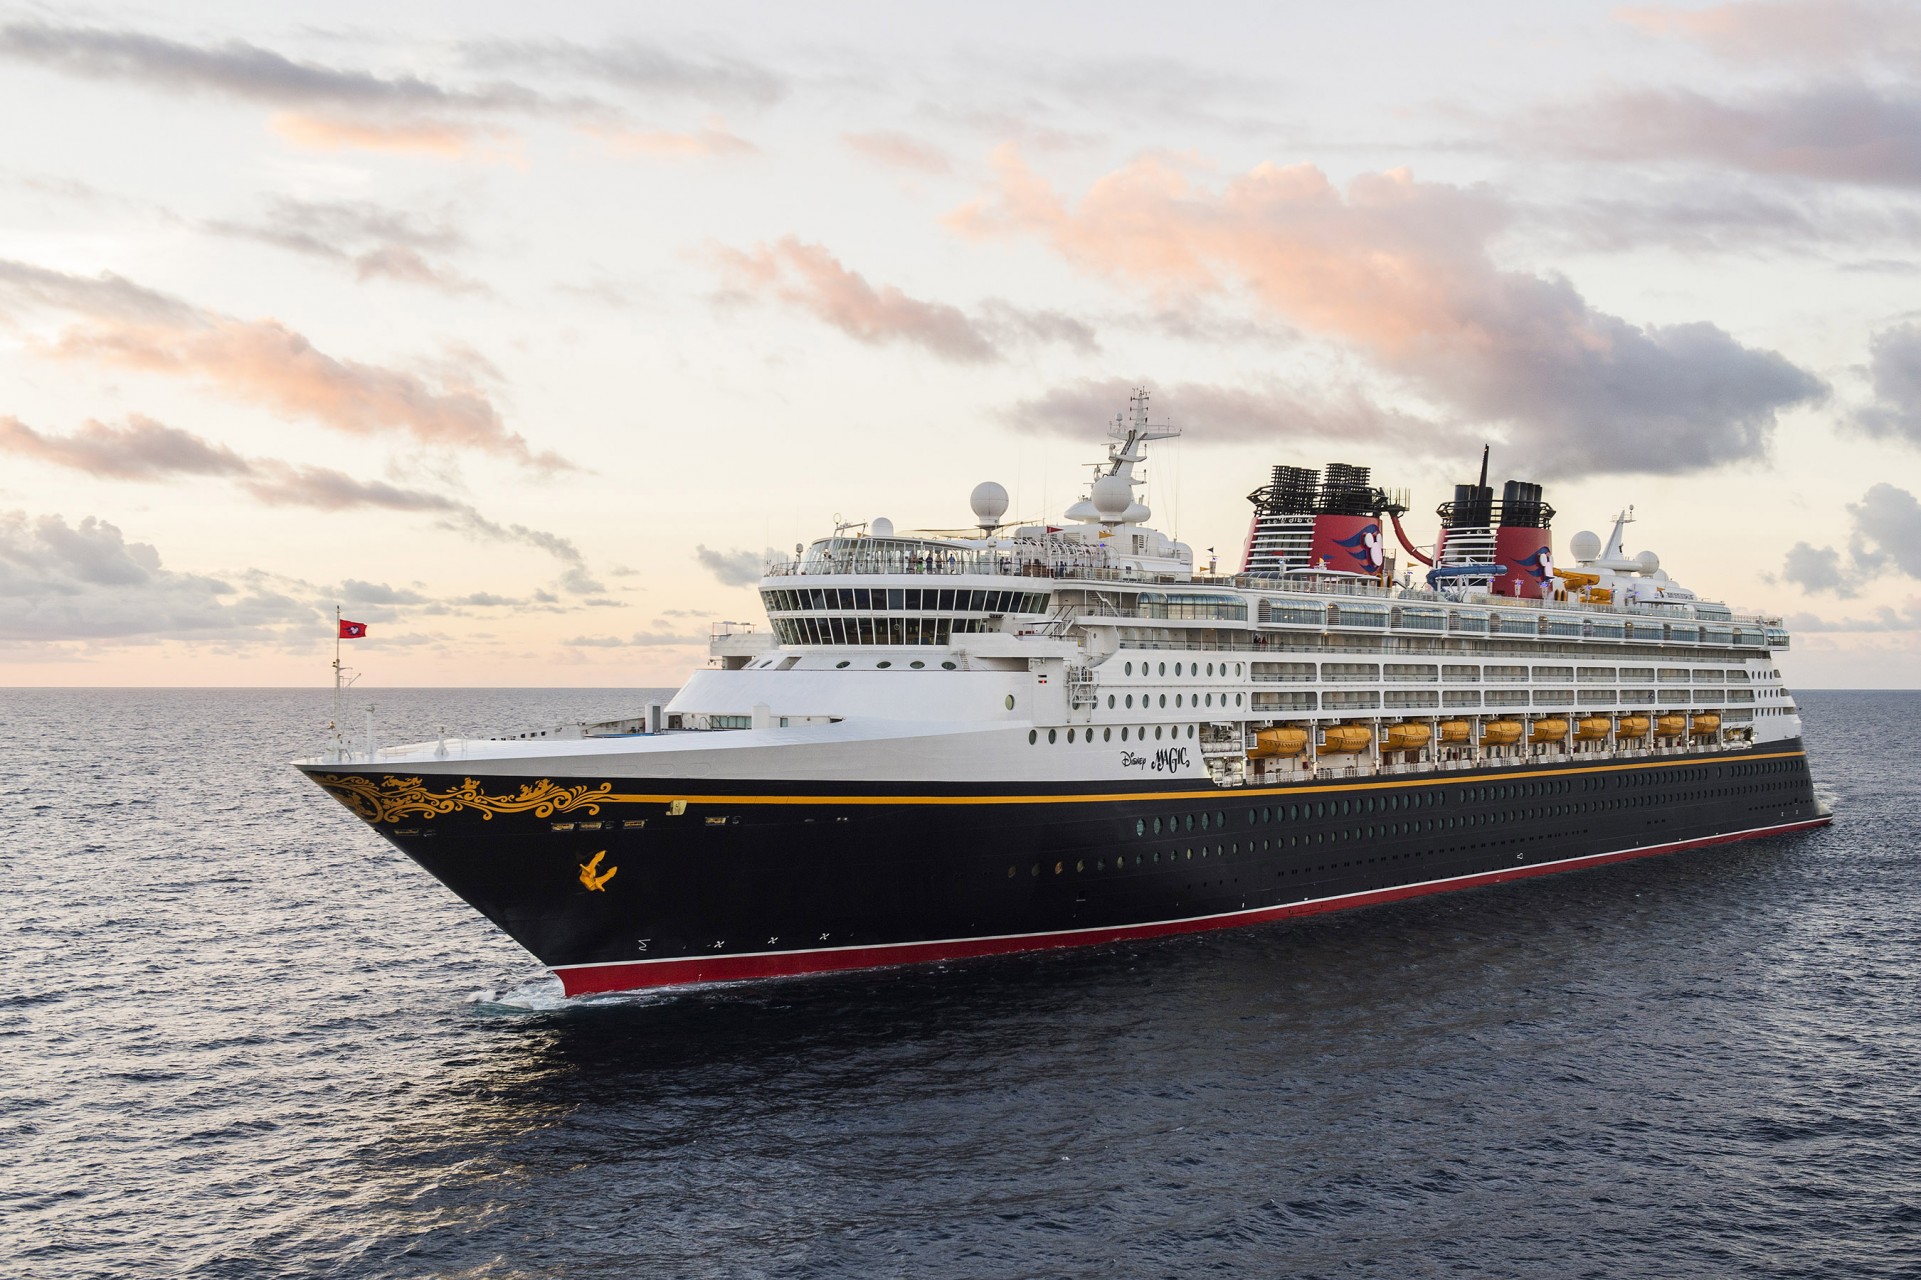 PAX Disney Cruise Line to expand Port Canaveral operations